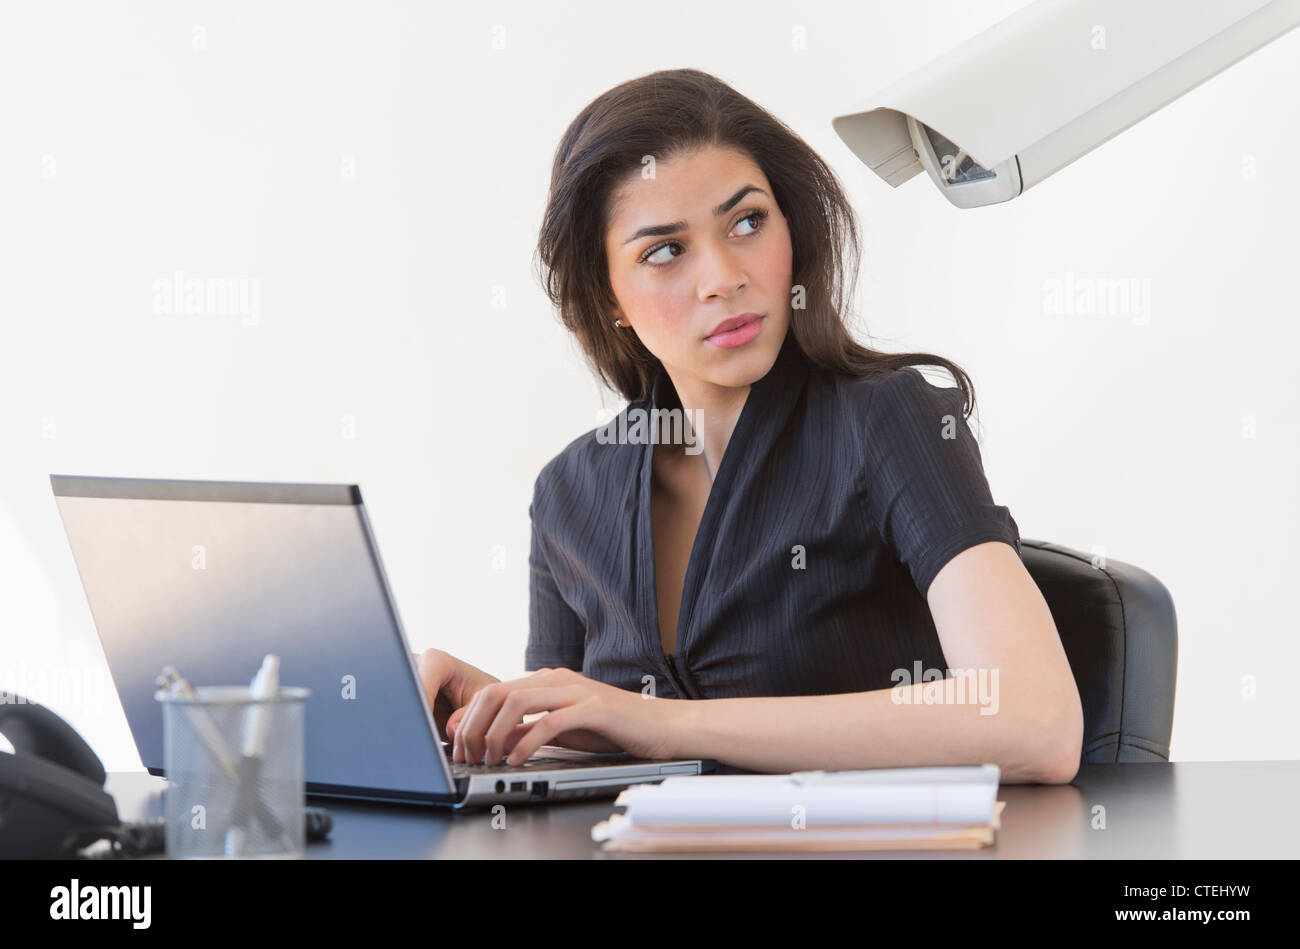 Businesswoman spied on by cctv camera Stock Photo